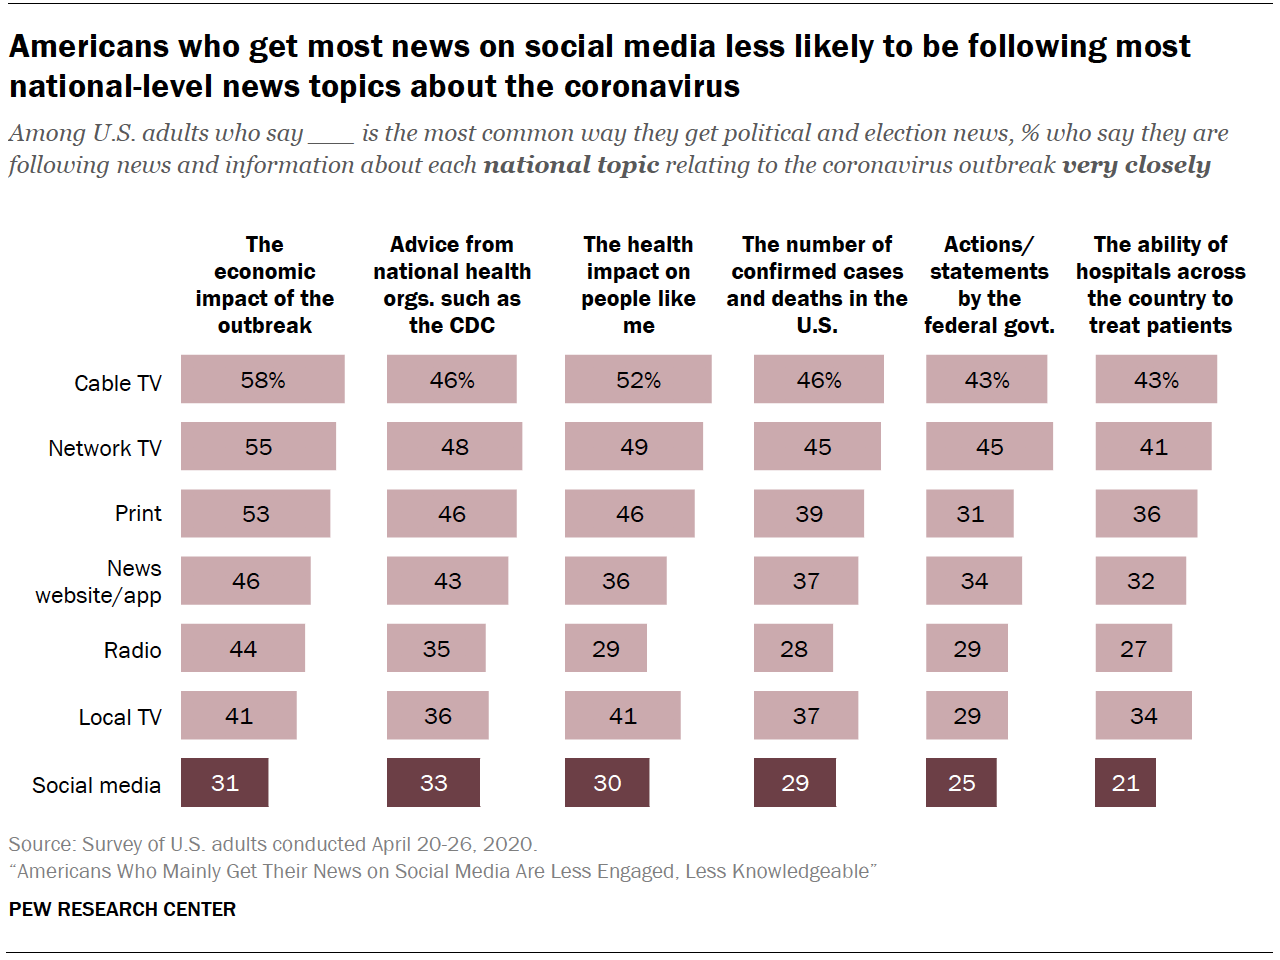 Chart shows Americans who get most news on social media less likely to be following most national-level news topics about the coronavirus